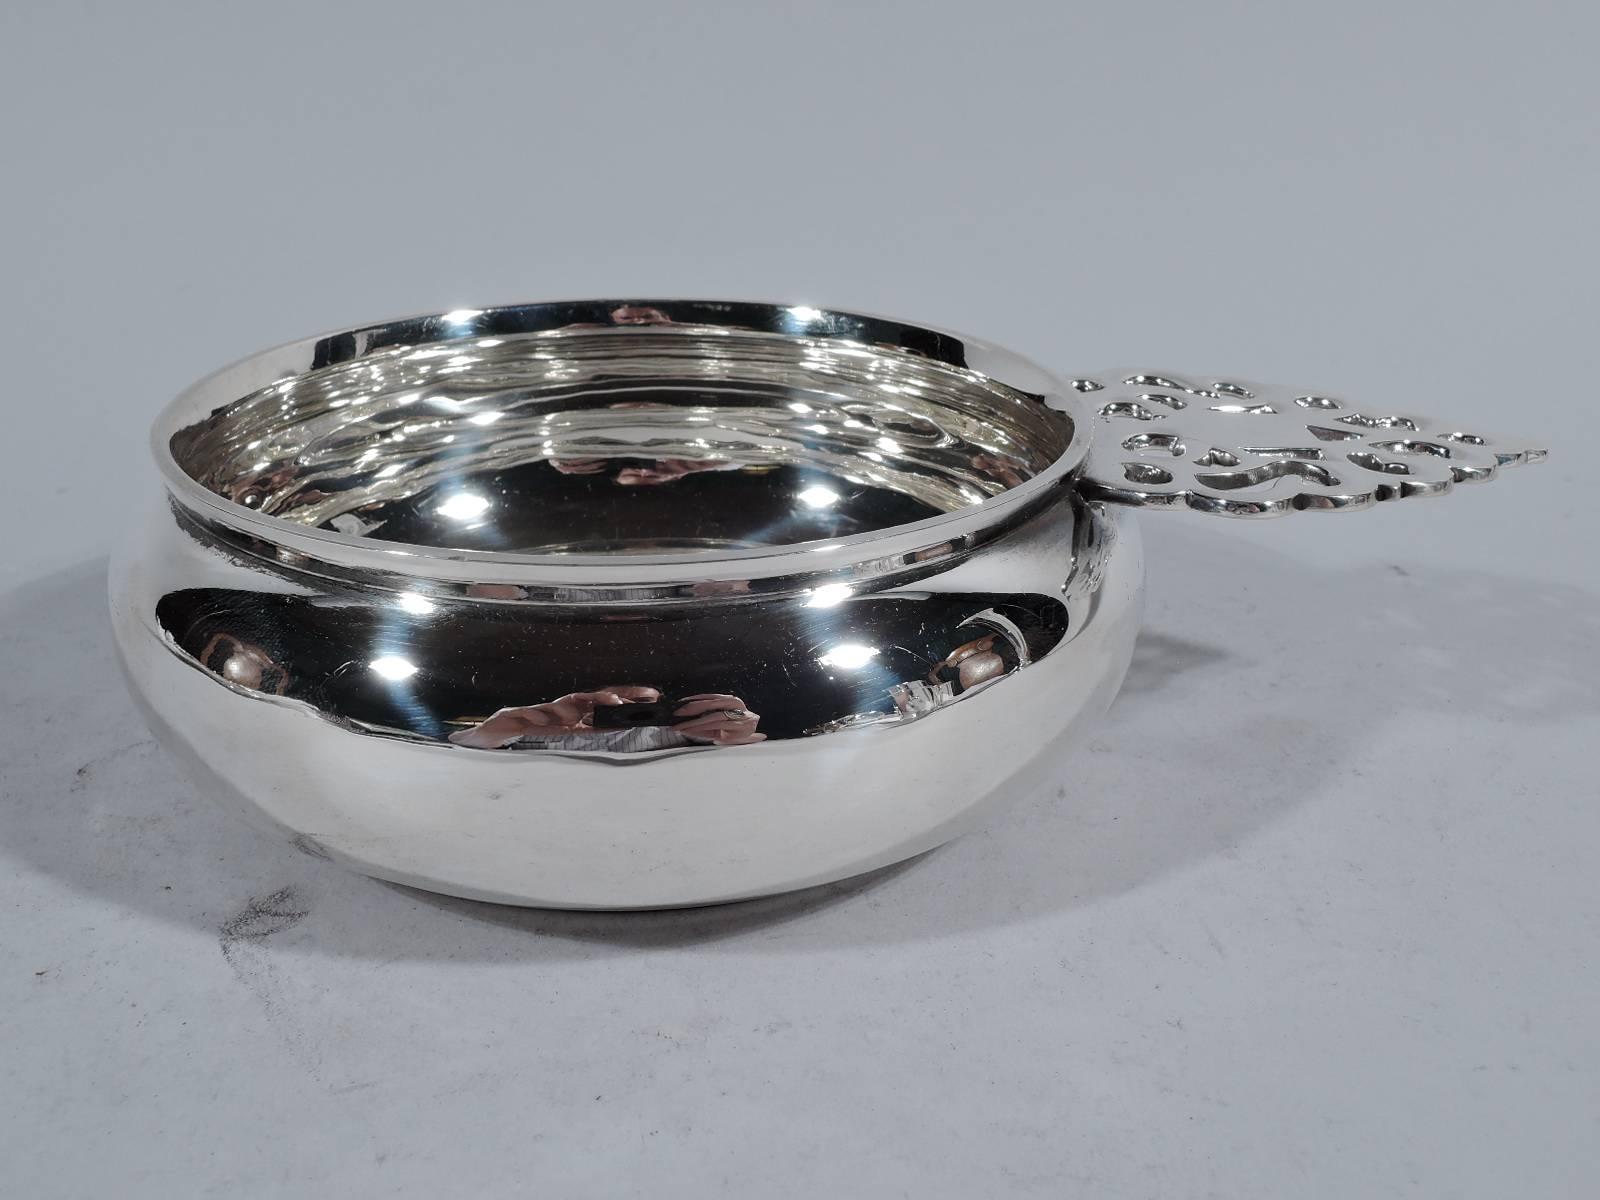 Traditional sterling silver porringer. Bellied bowl and pierced vase handle. Hallmarked Goodnow & Jenks, a Boston maker active around the turn of the last century. Hallmark includes no. 26 and Boston retailer’s name Bigelow, Kennard & Co. Weight: